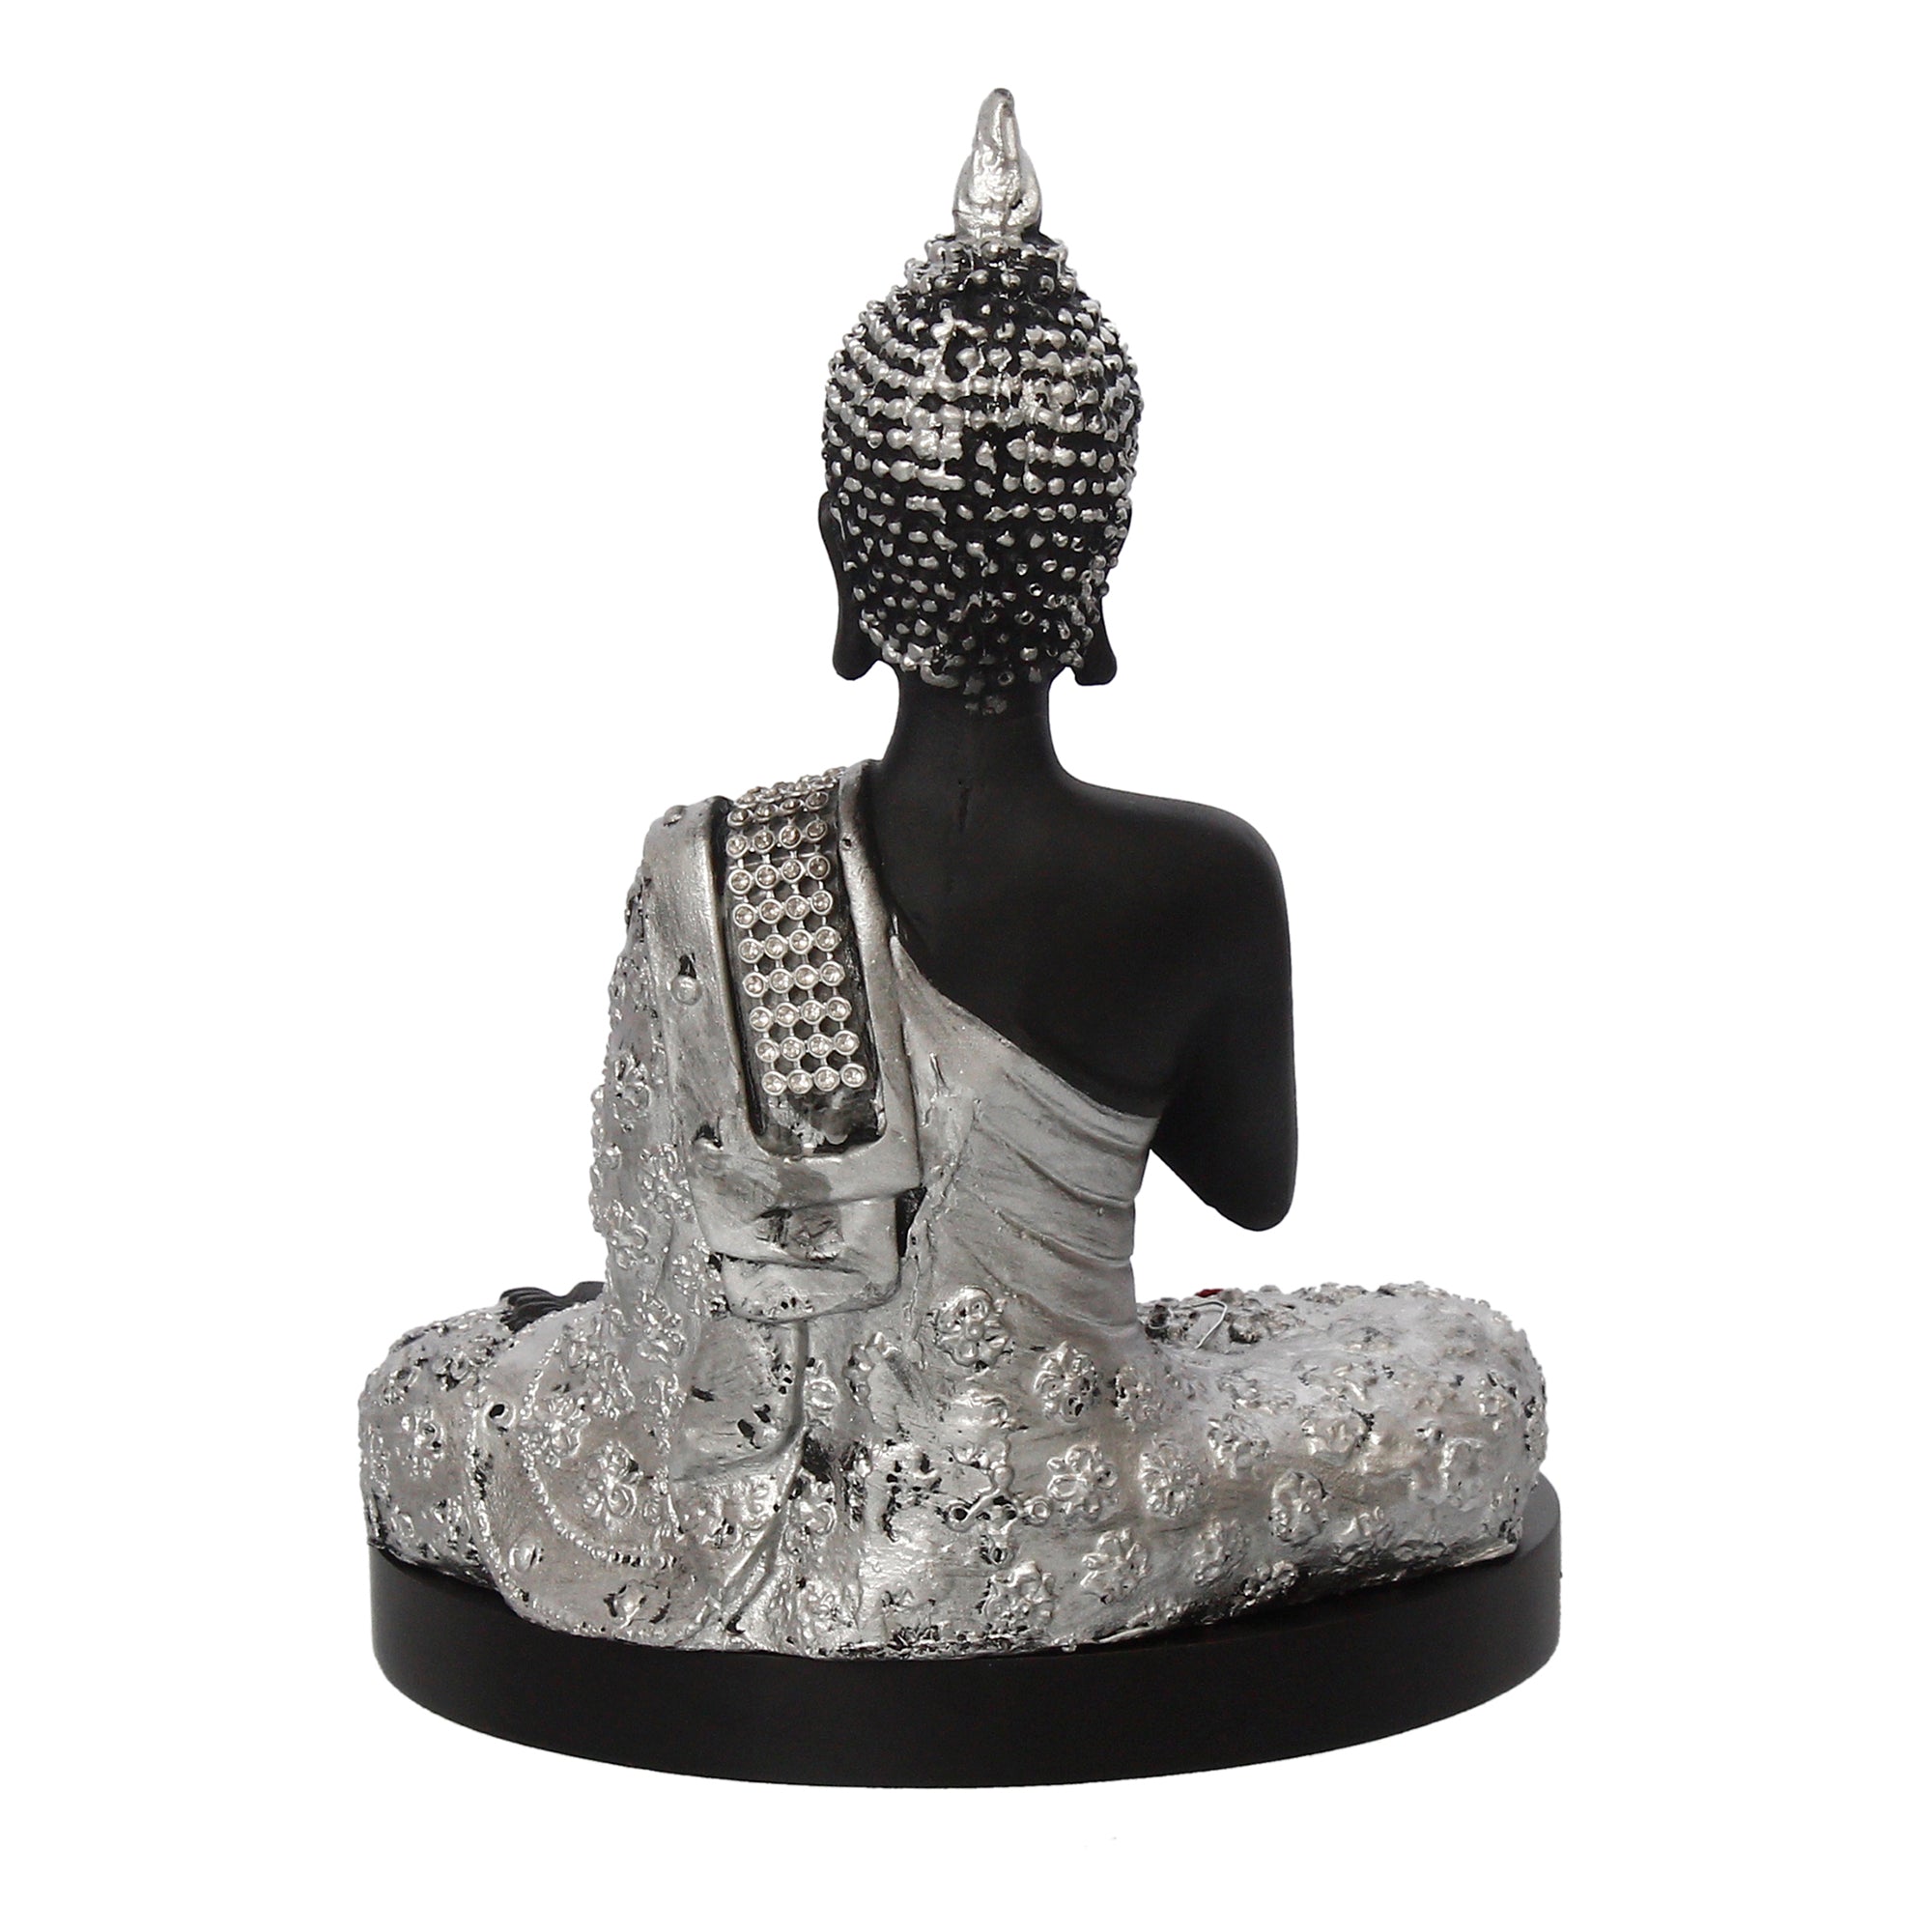 Polyresin Black and Silver Handcrafted Meditating Blessing Buddha Statue with Wooden Base, Fragranced Petals and Tealight 6